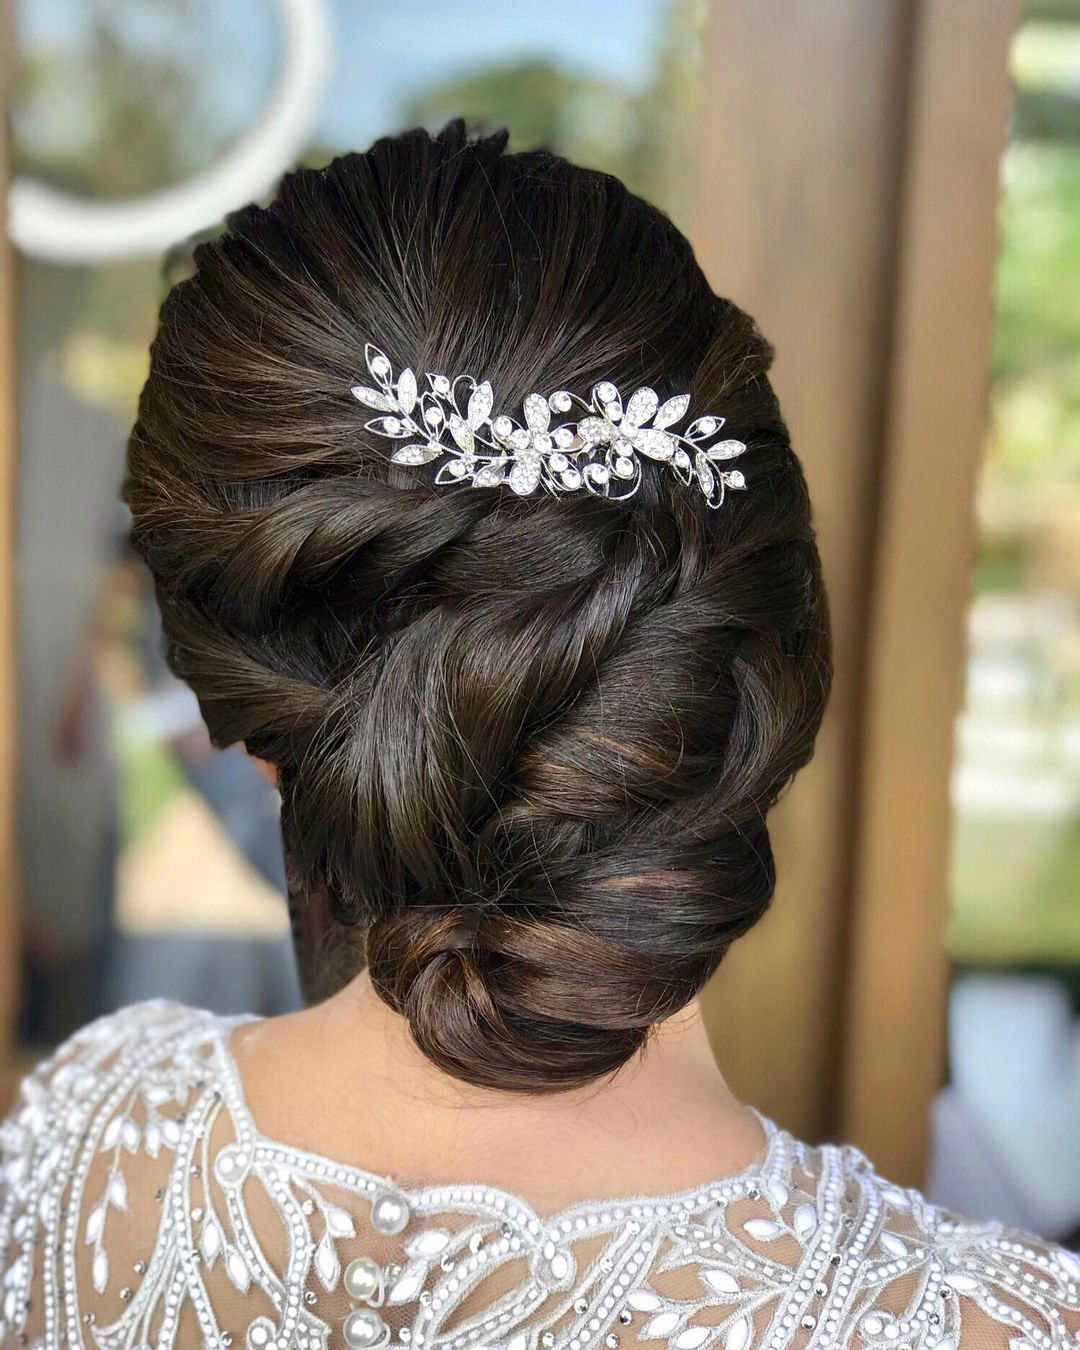 bridal hair pins textured braided updo with vintage comb atenikks